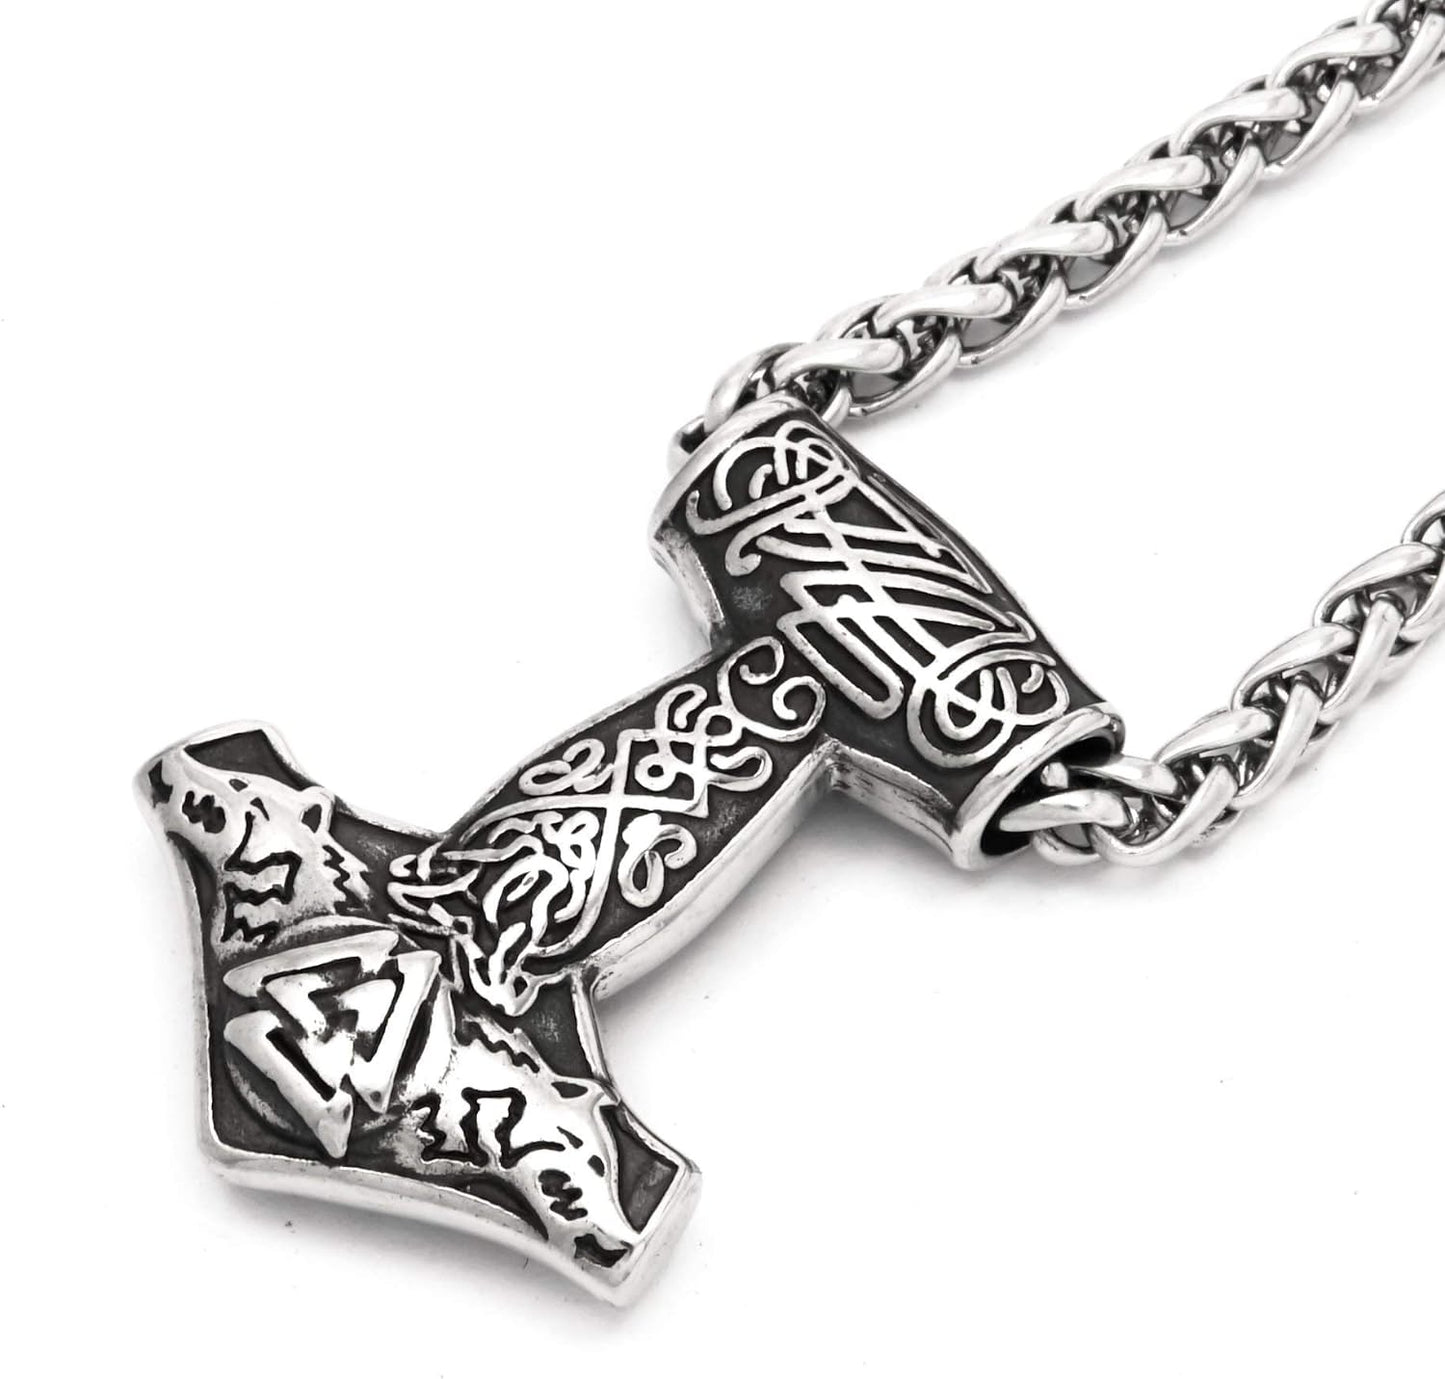 Bavipower Norse Thor Hammer Necklace For Men Mjolnir Pendant Double Wolf Head Fenrir Stainless Steel Keel Chain Viking Jewelry